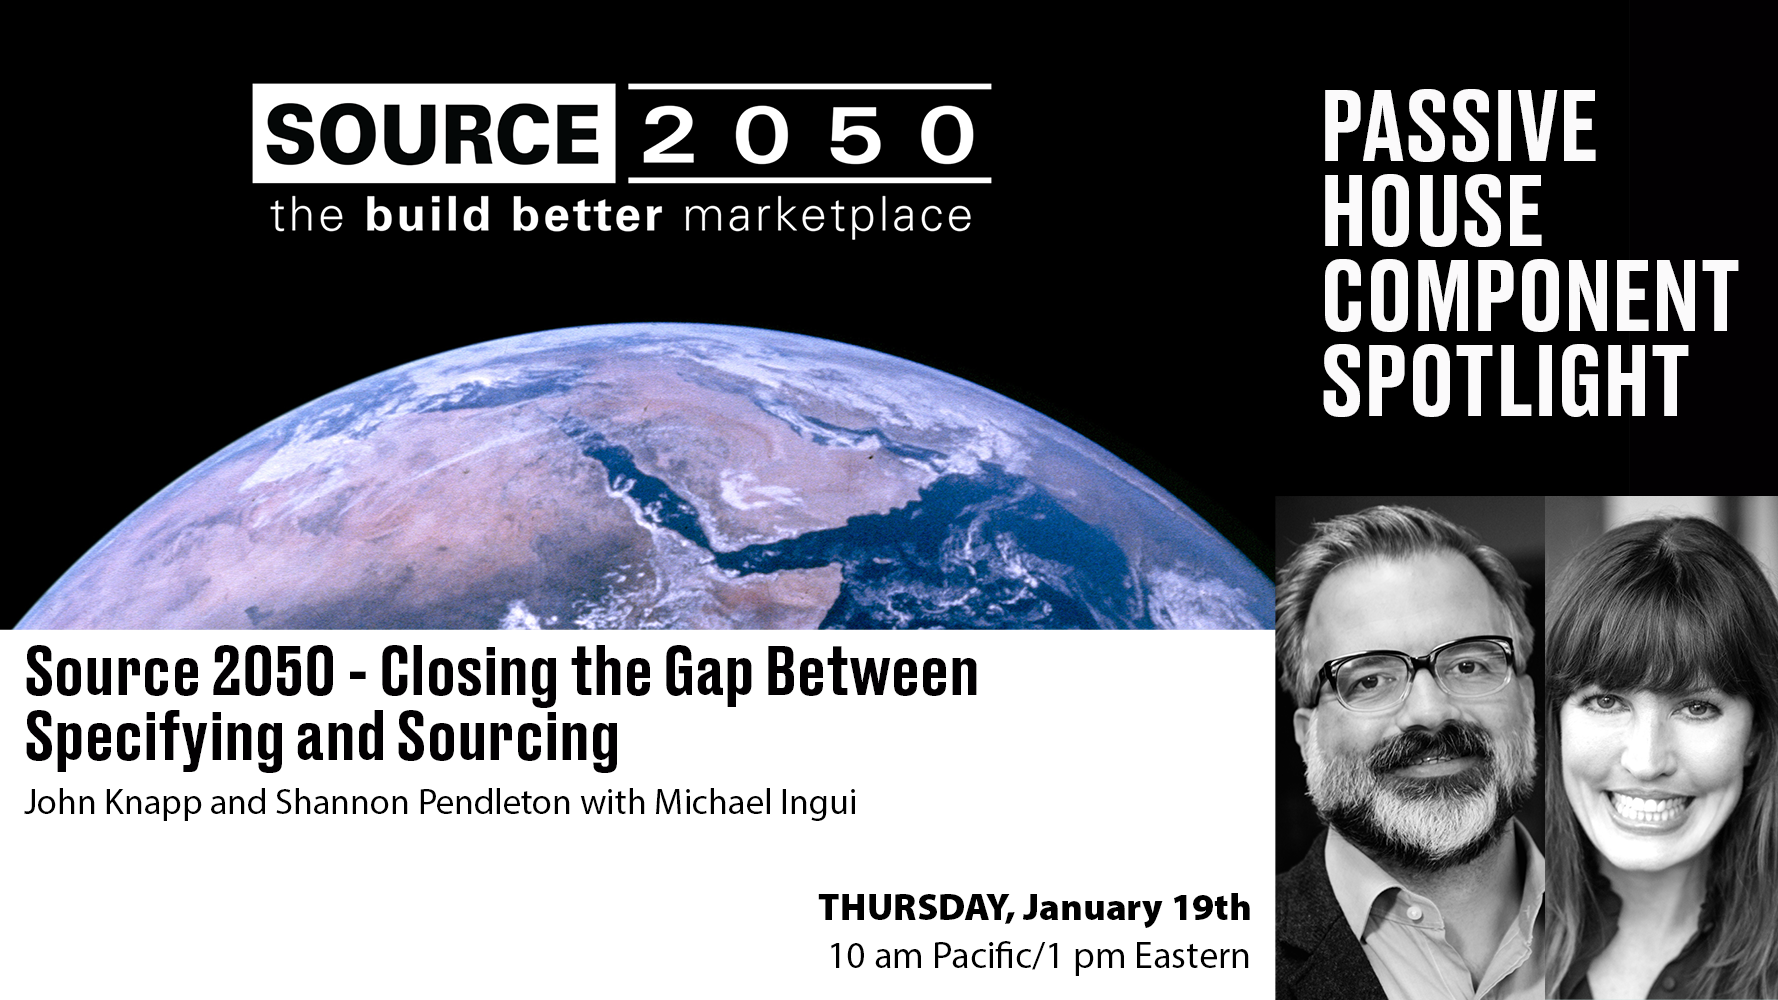 Source 2050 - Closing the Gap Between Specifying and Sourcing